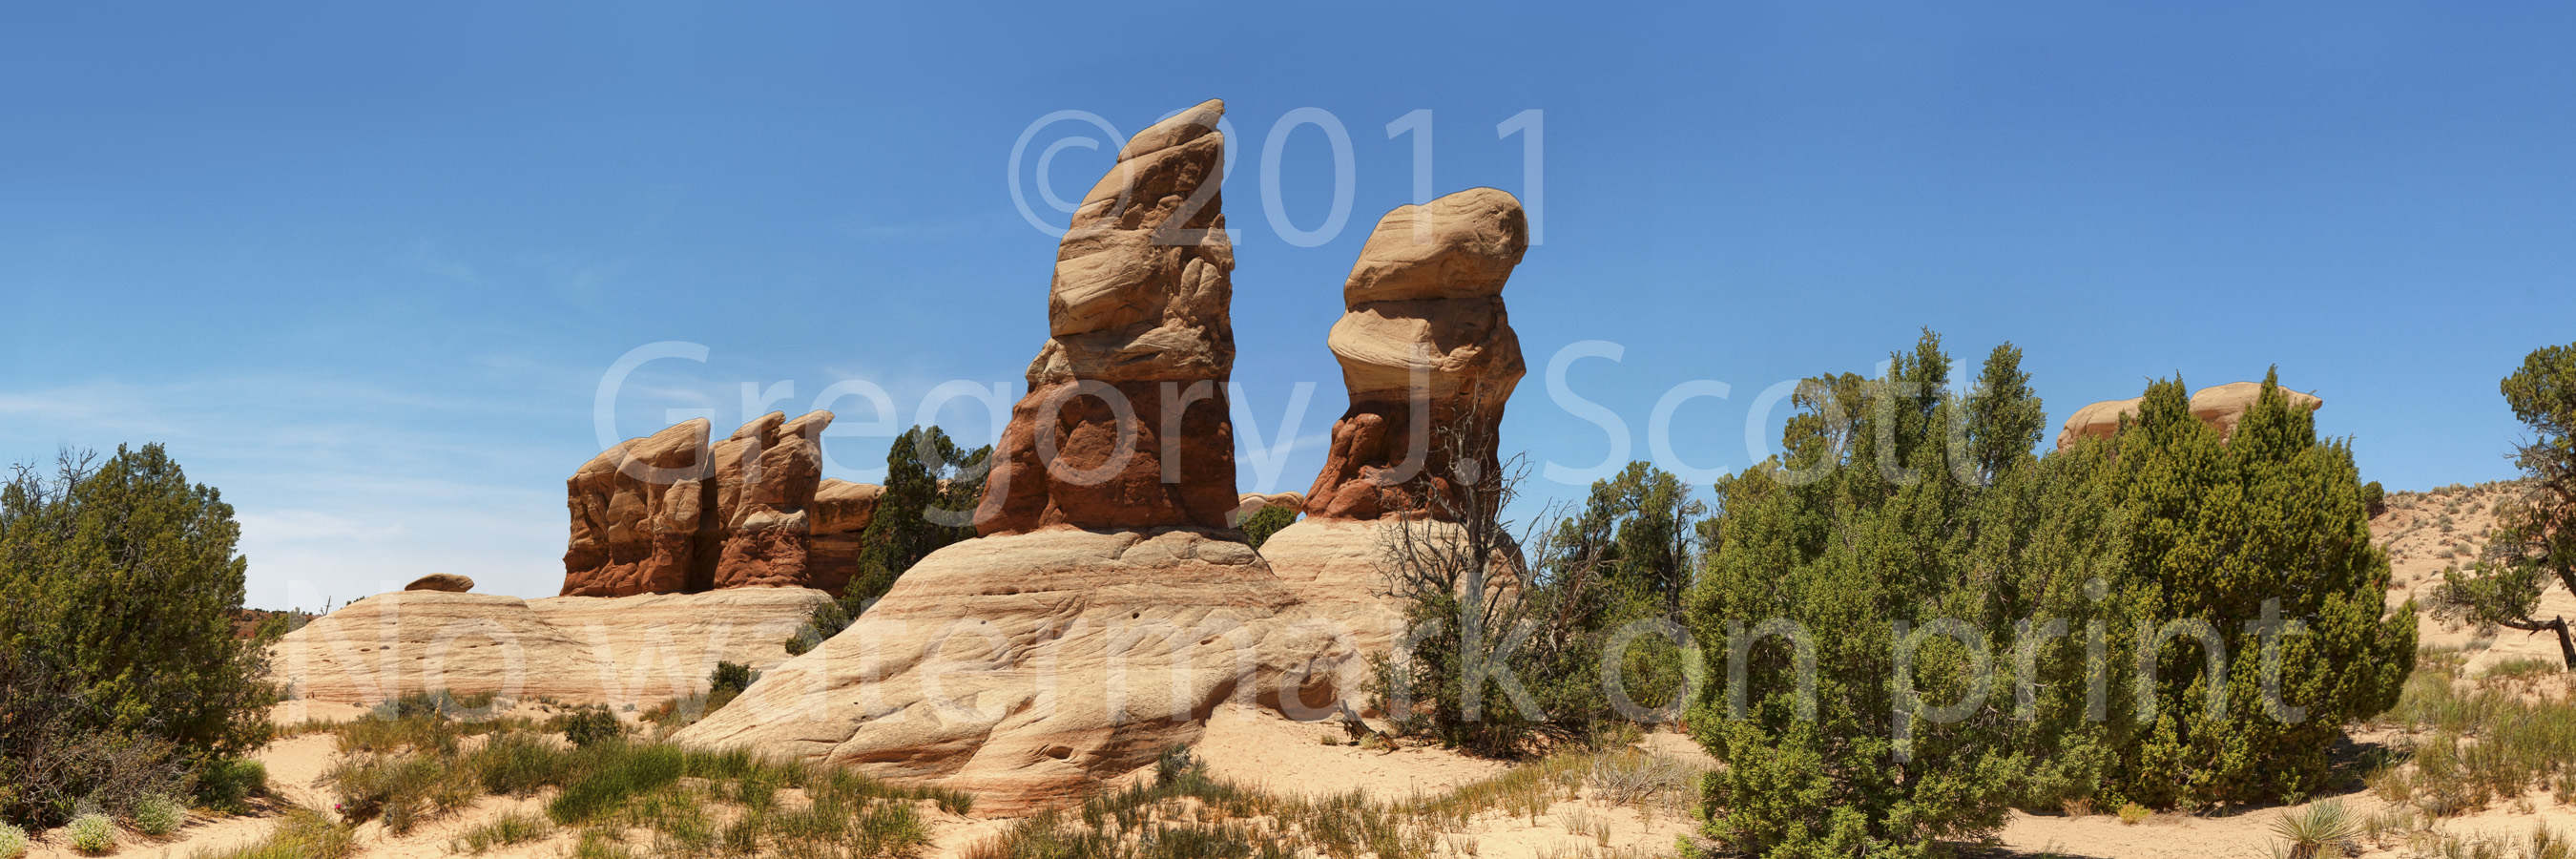 Mysterious Hoodoo Gathering, Photographed May 31, 2011